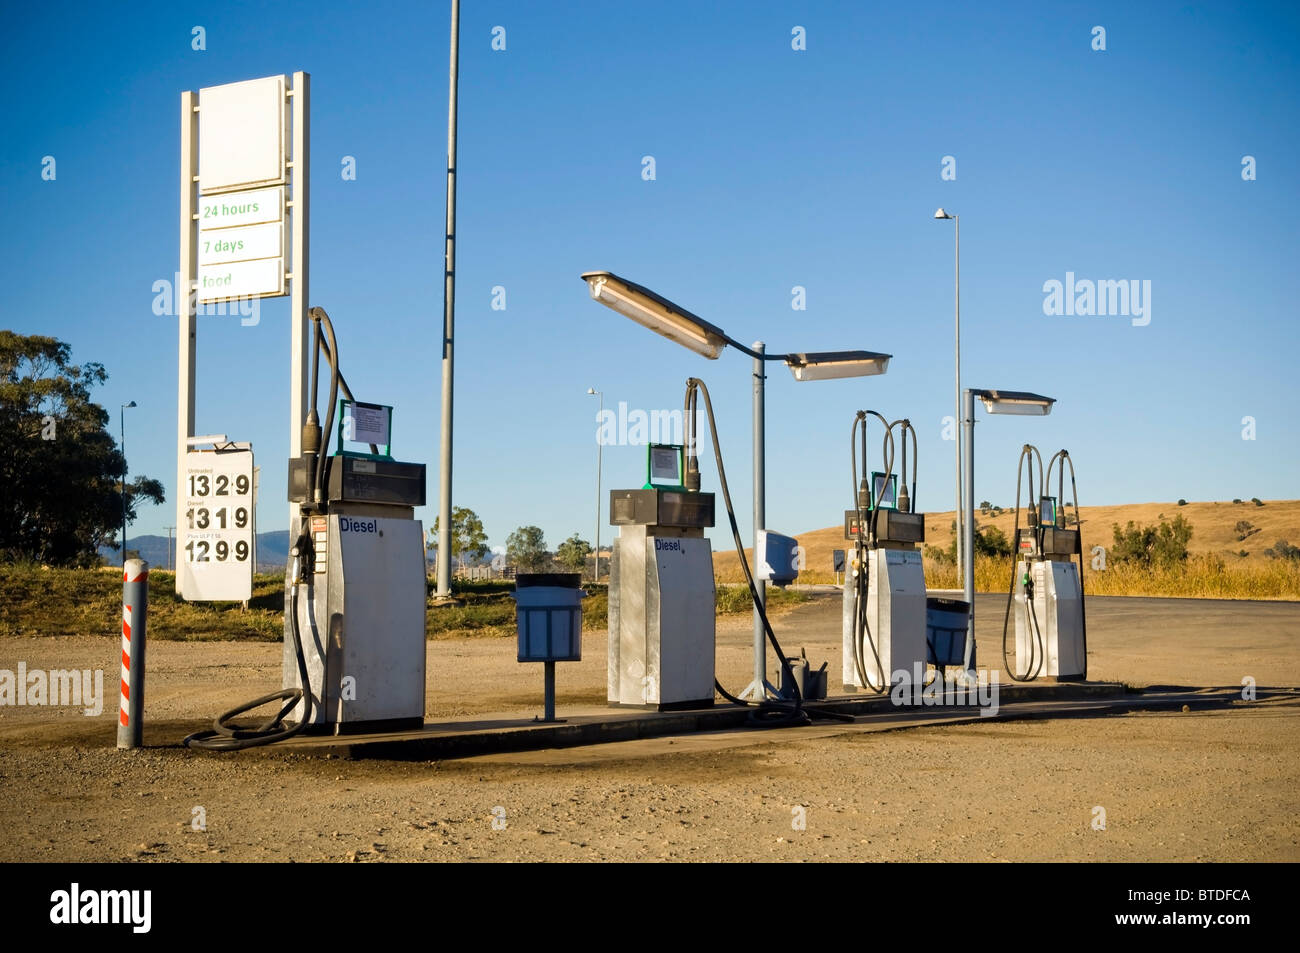 Generic service / gas station in remote rural area Stock Photo